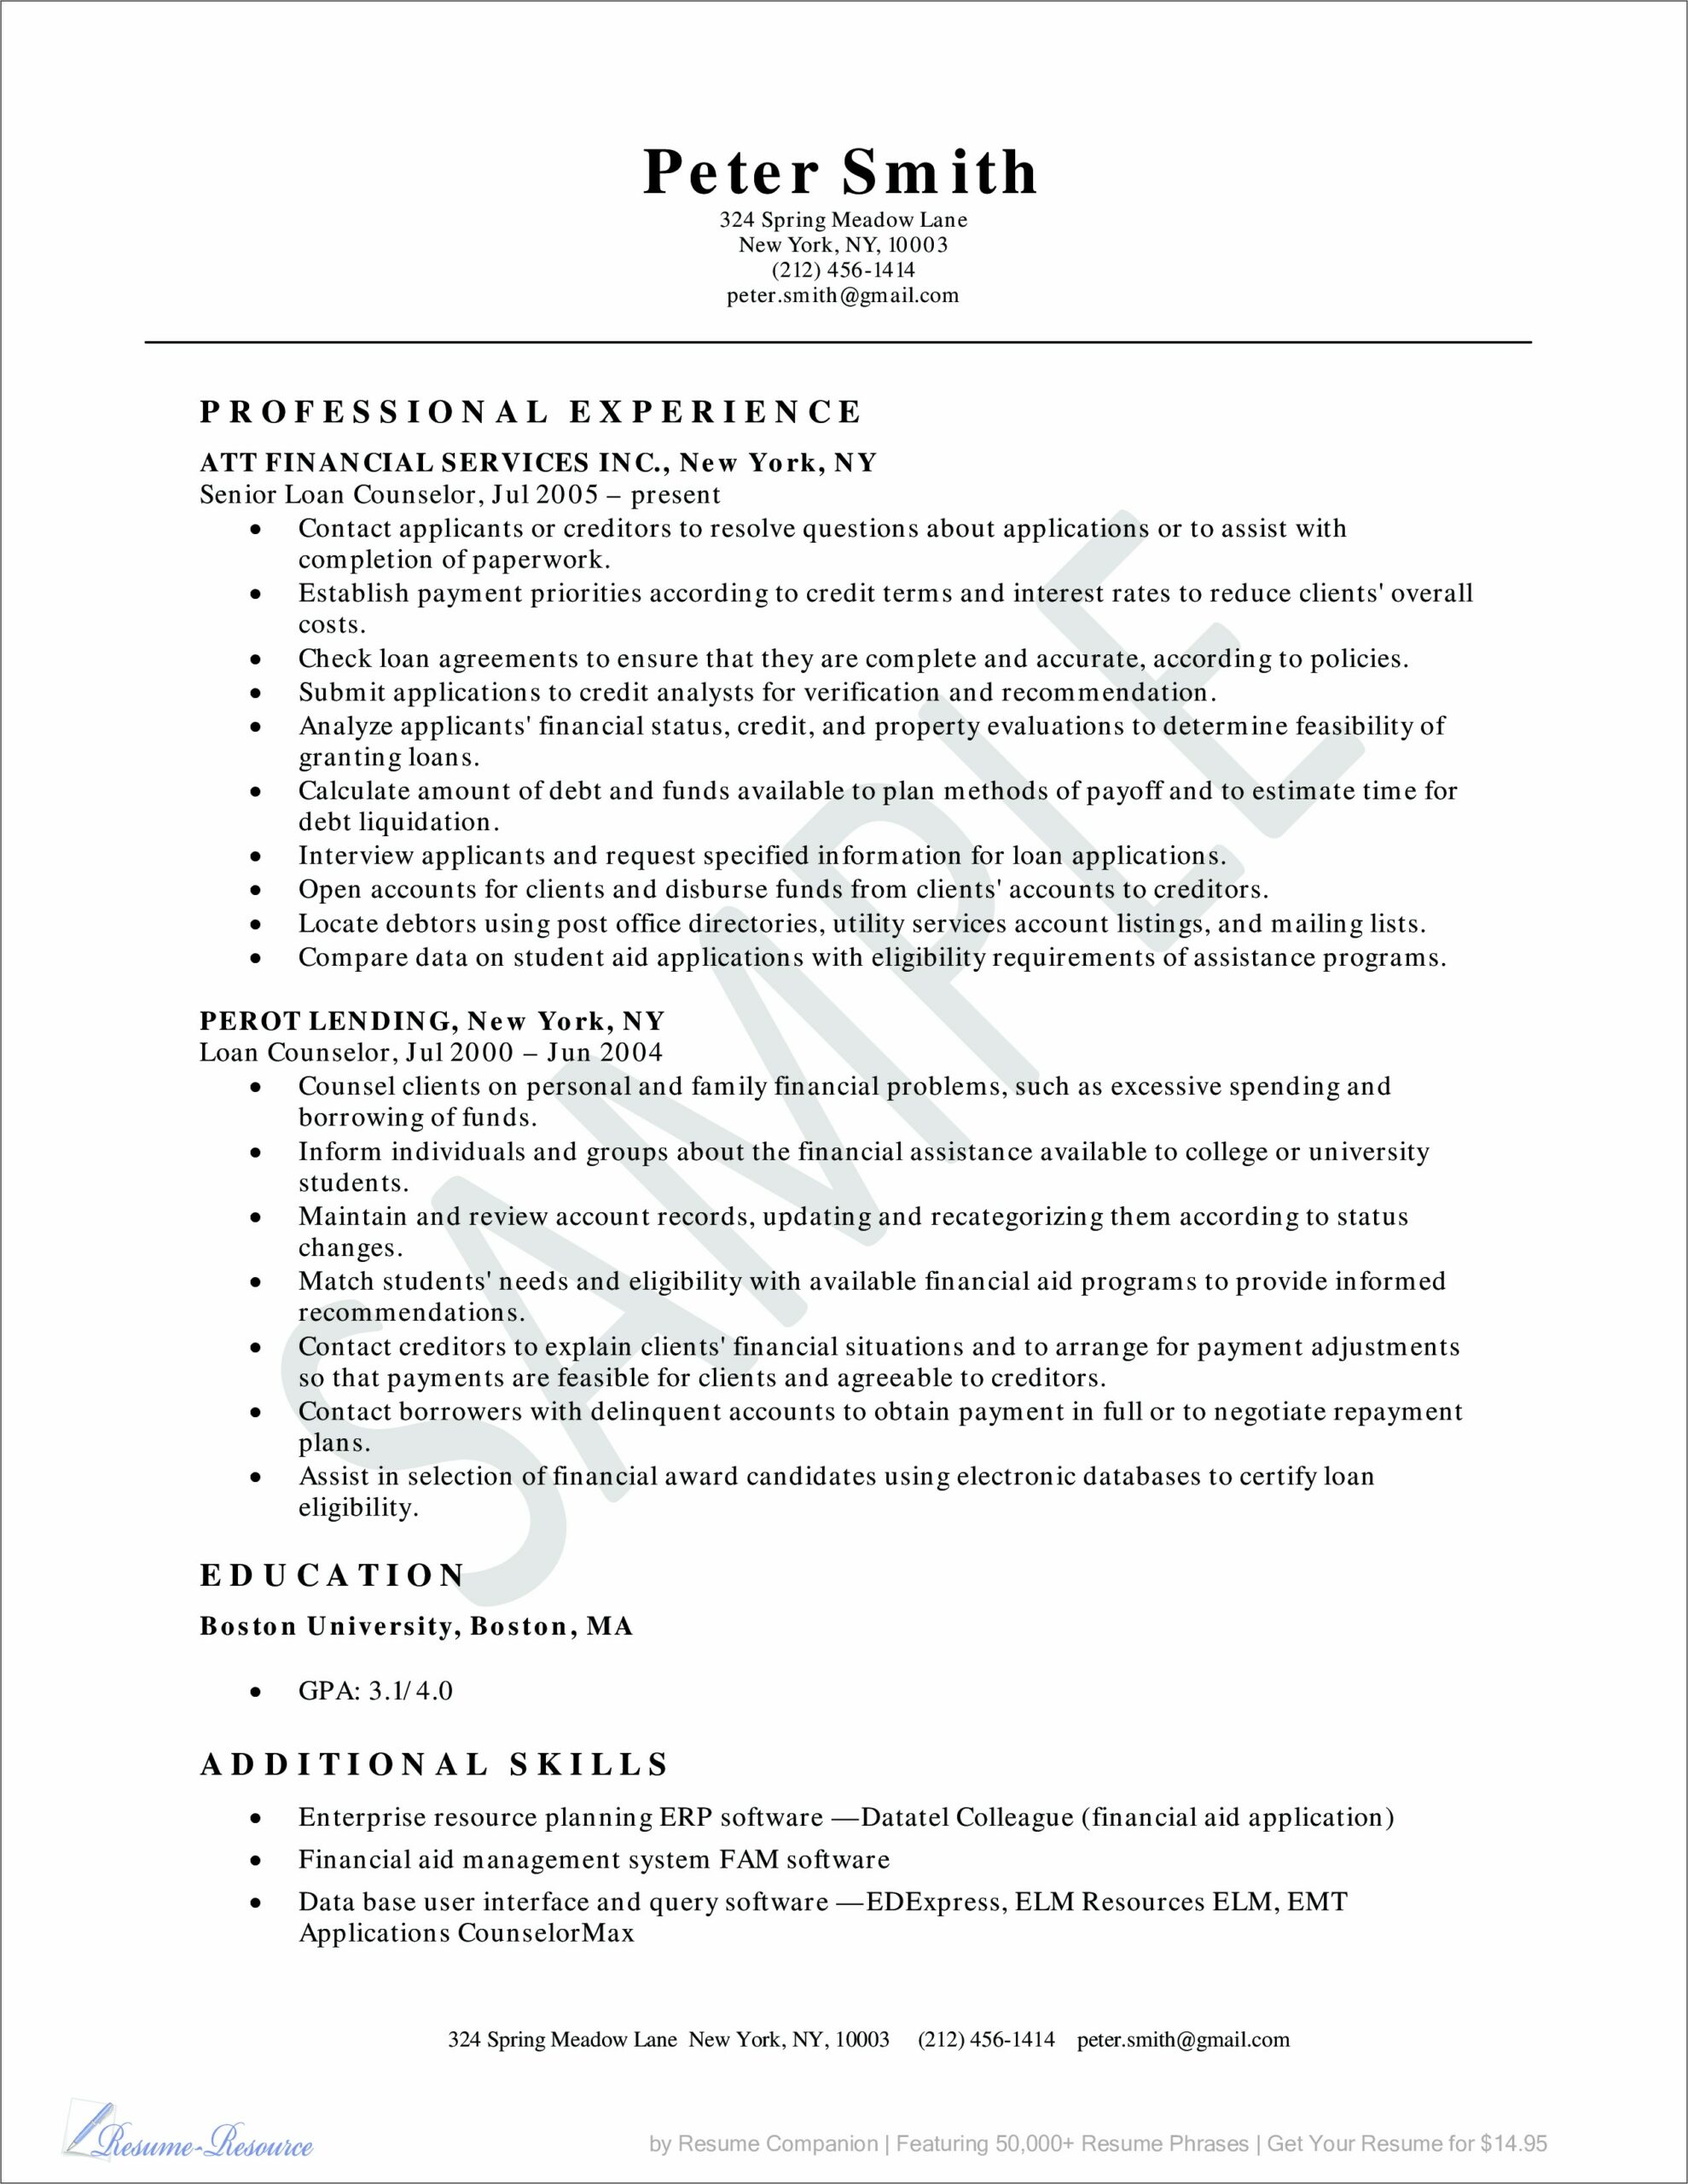 Financial Aid Counselor Resume Objective